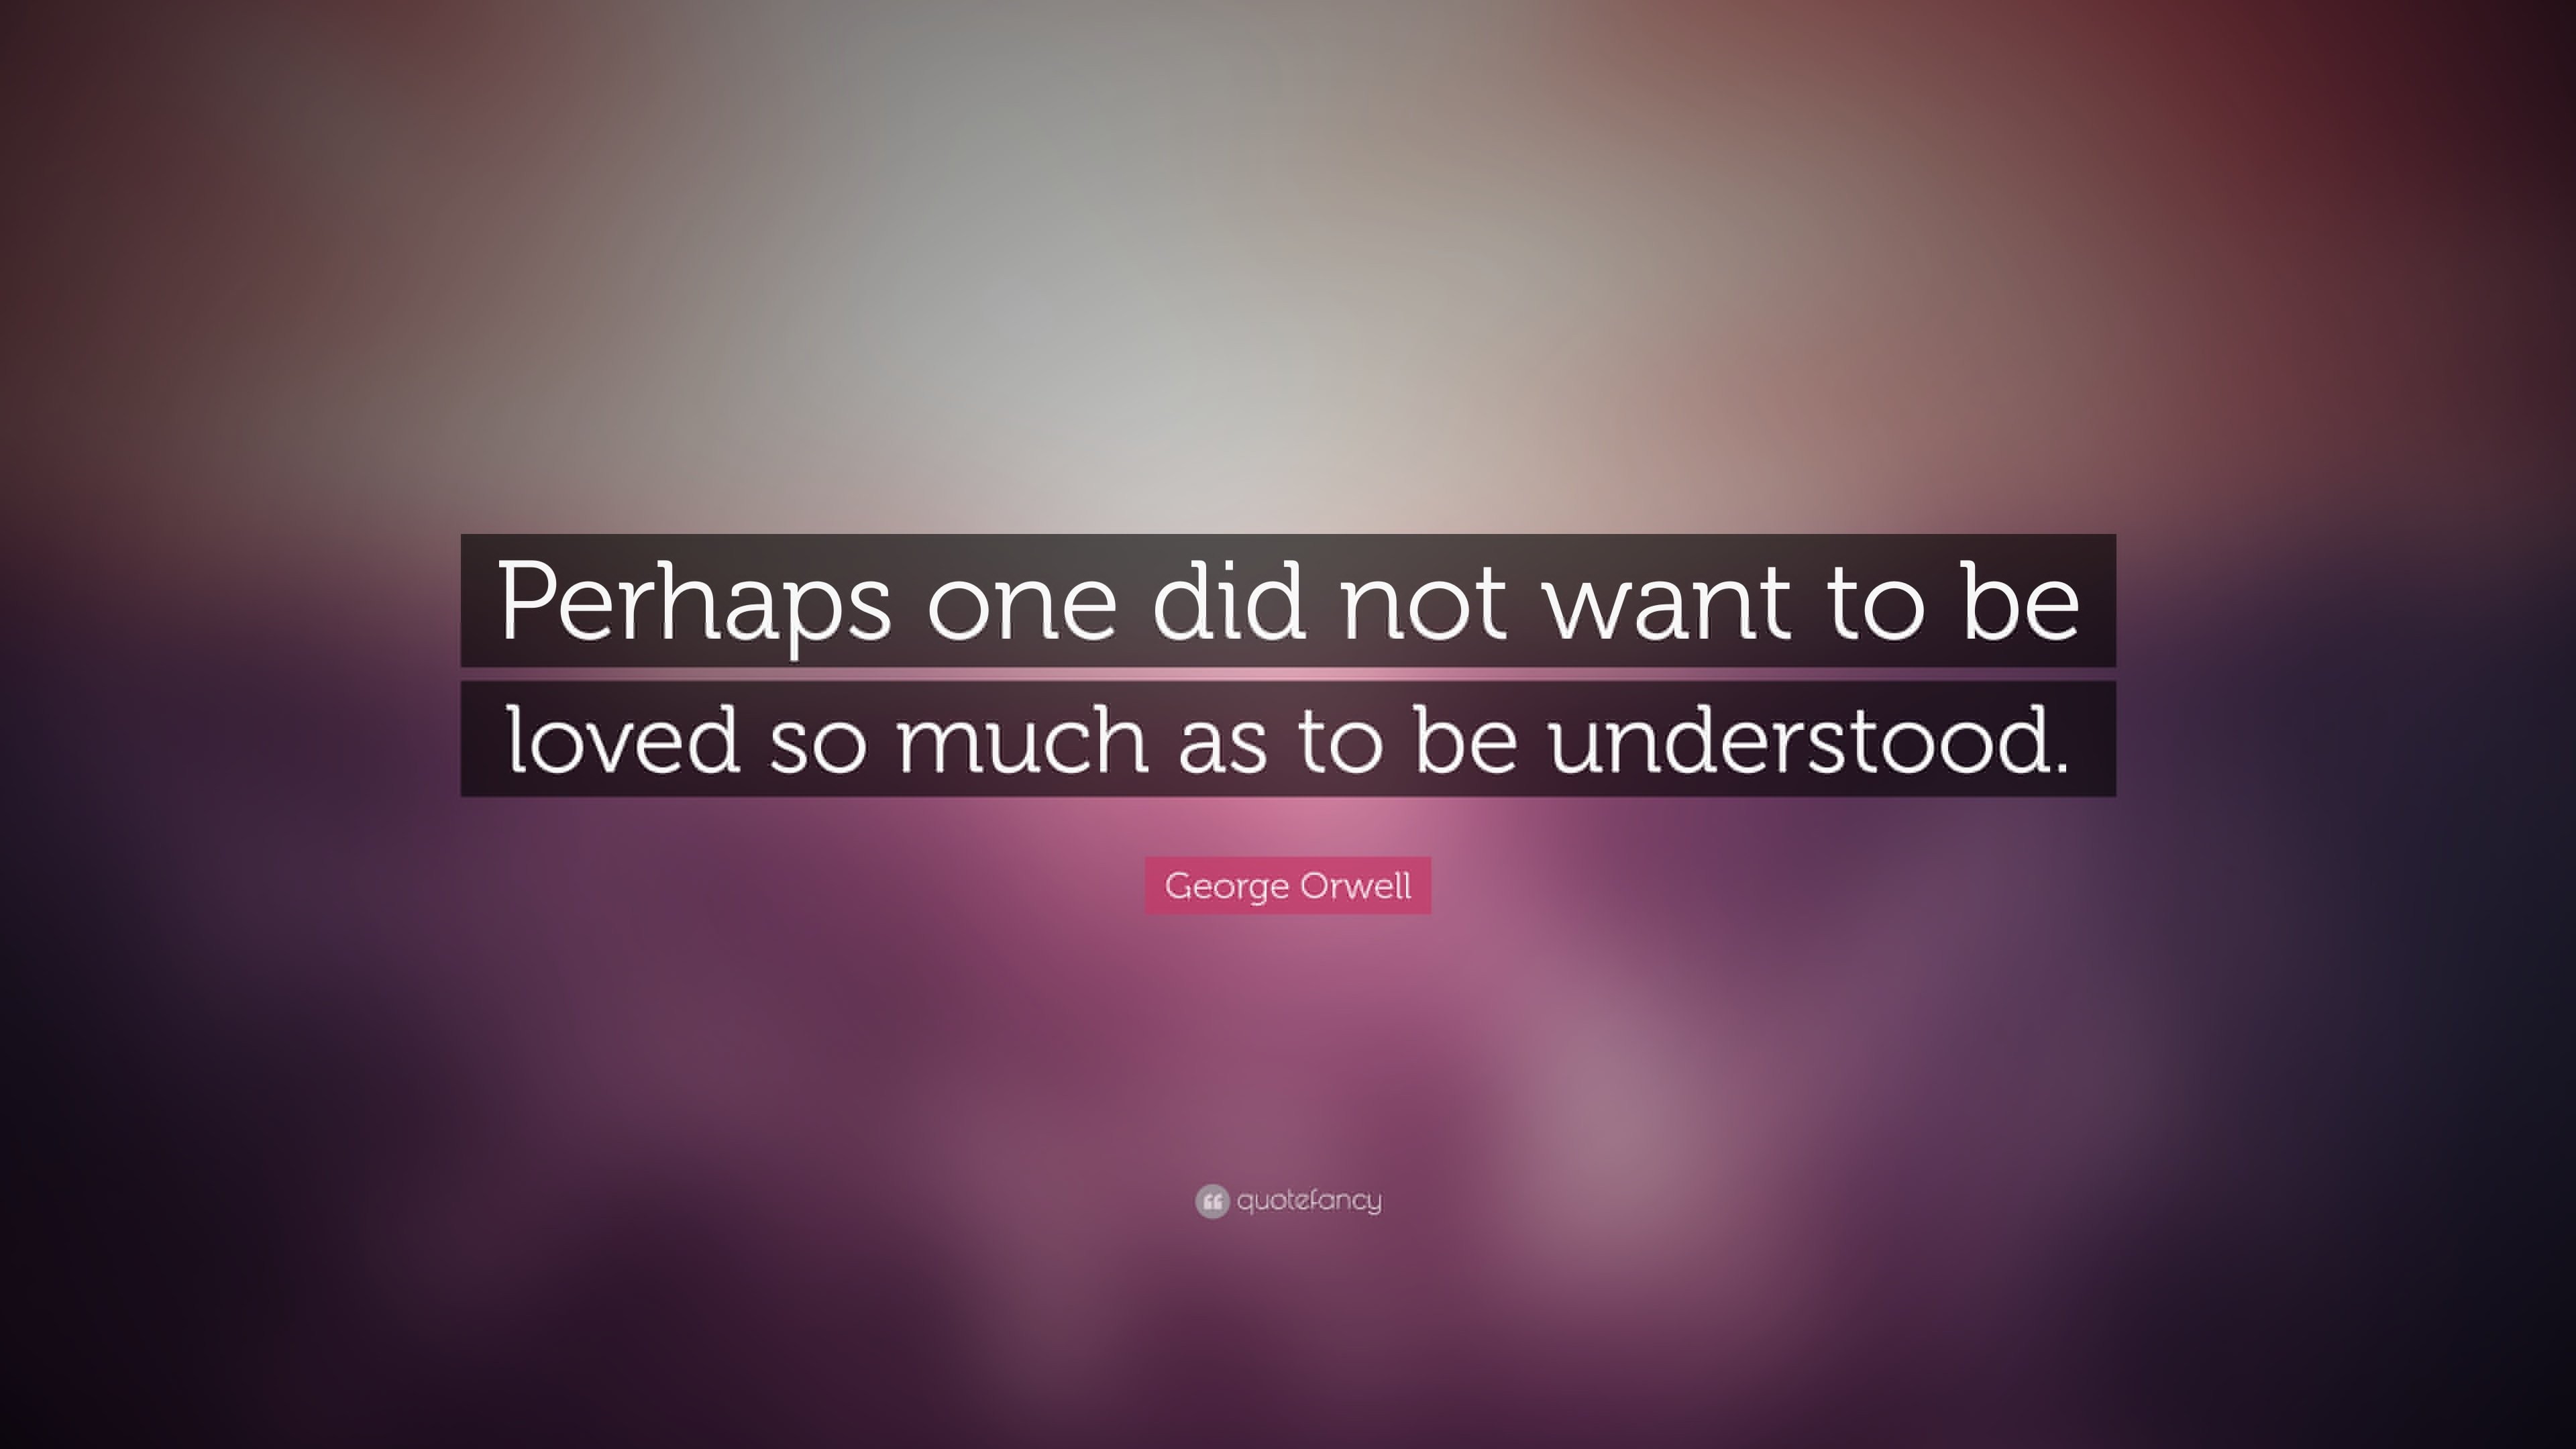 perhaps one did not want to be loved so much as to be understood. george orwel